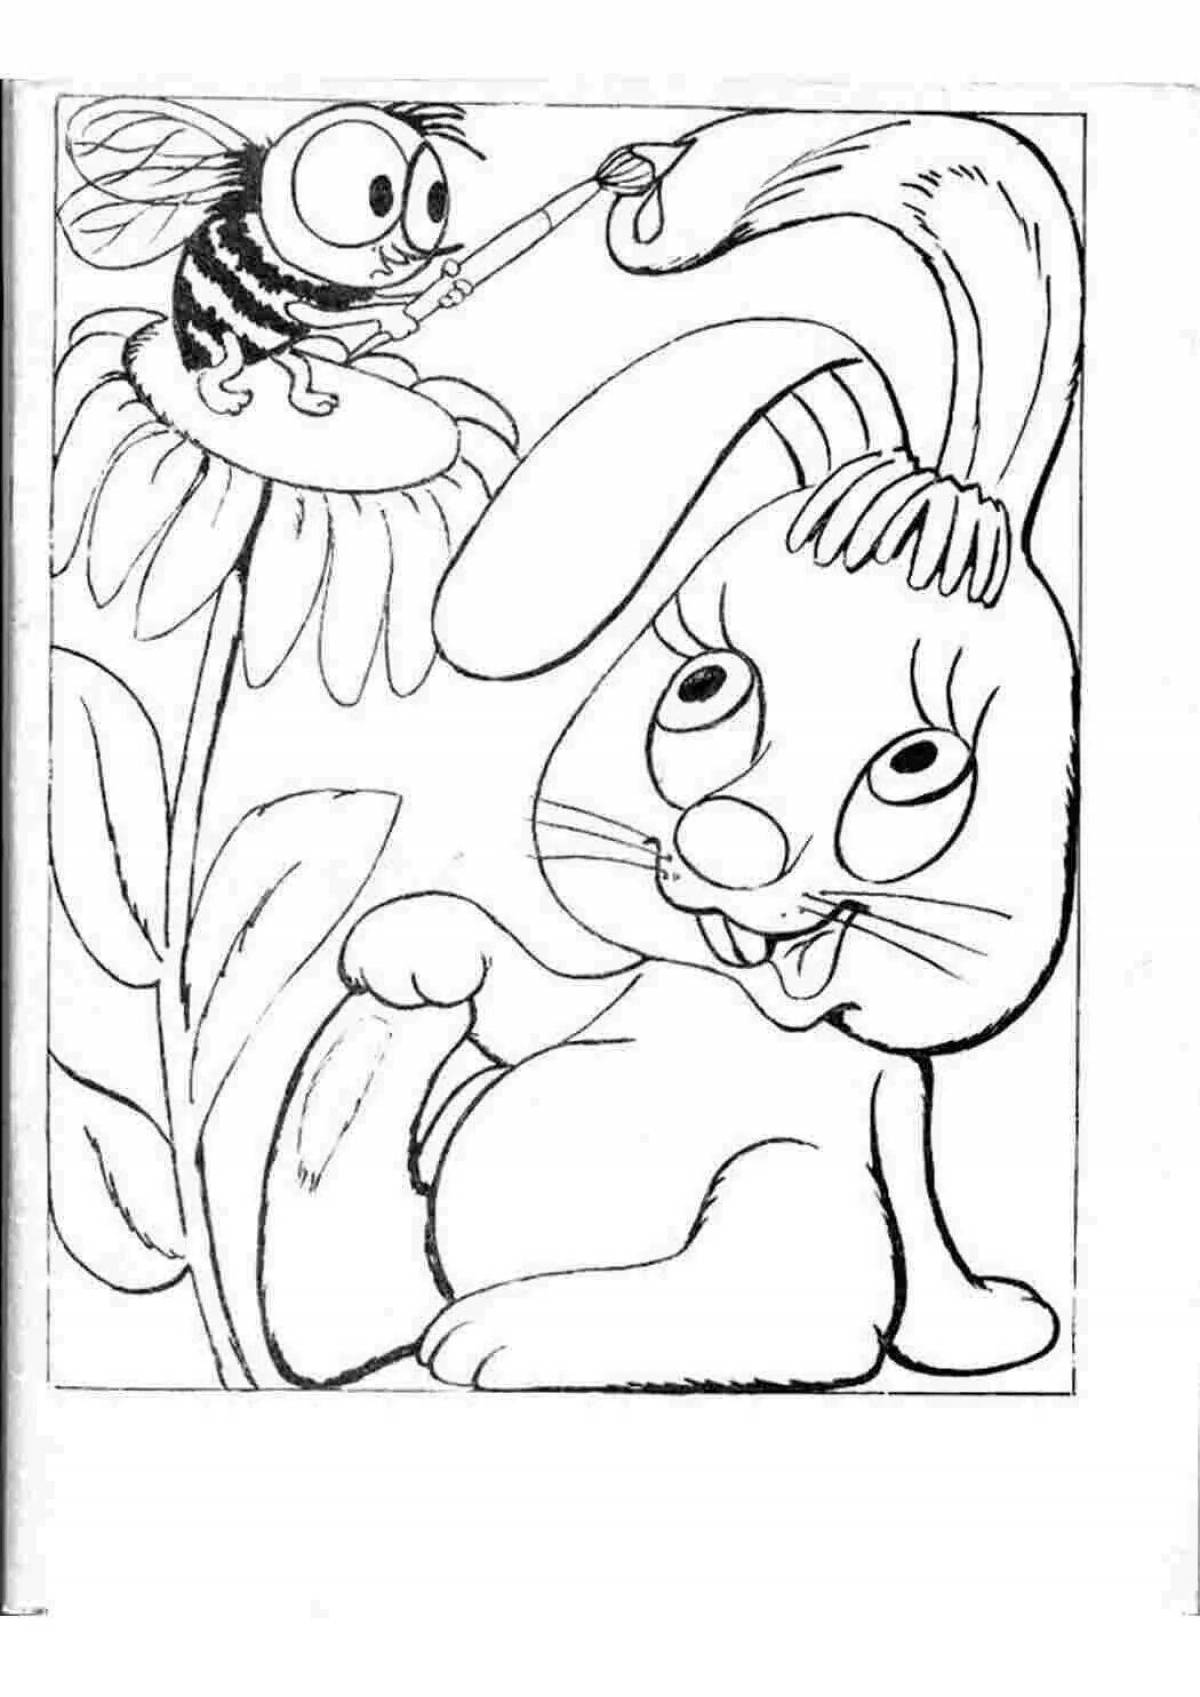 Fun coloring book from the 90s